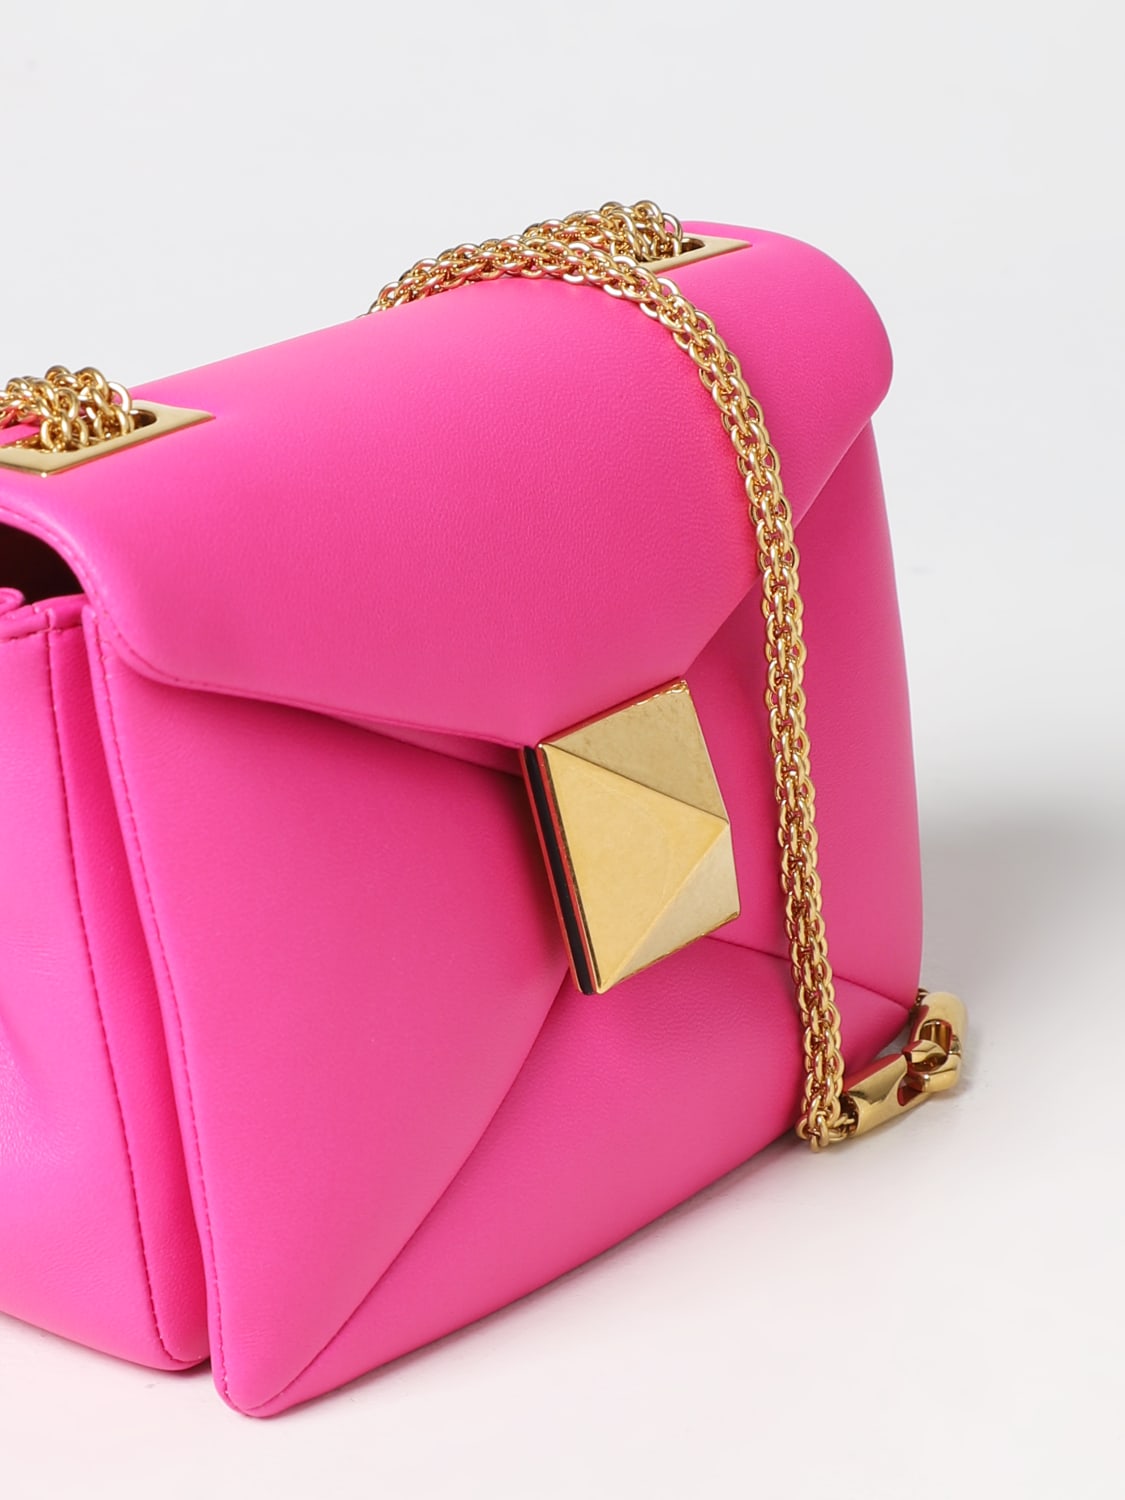 One Stud Nappa Bag With Chain for Woman in Pink Pp